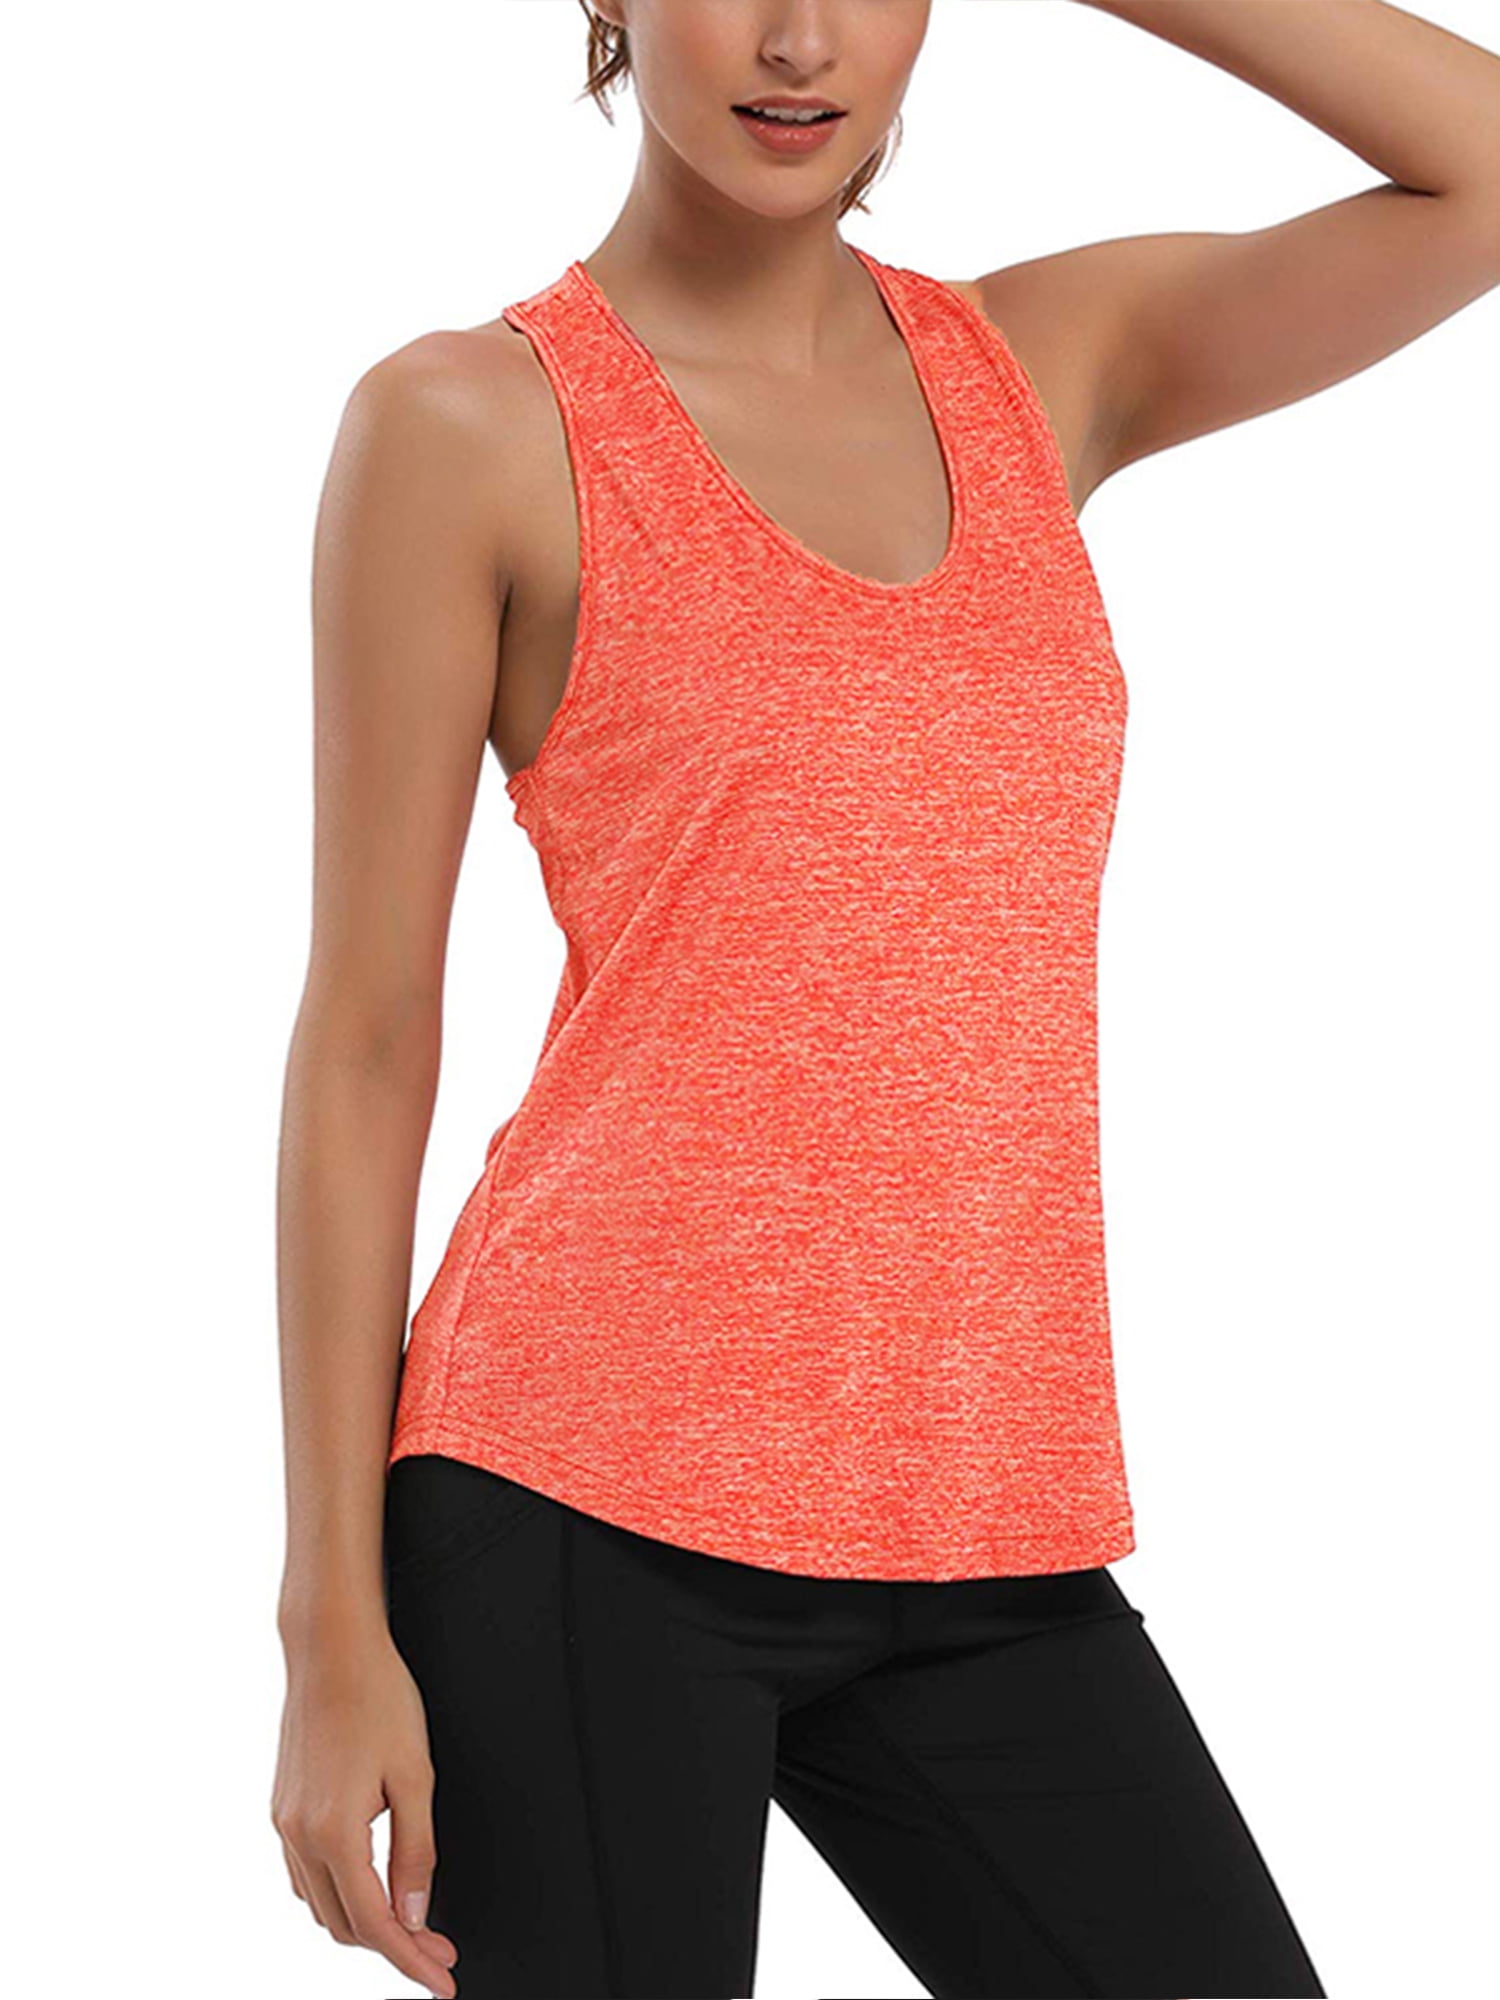 Workout Clothes Muscle Tank Women Workout Shirts Workout Shirts For Women Workout Tanks For Women Workout Tanks For Men Fitness Shirt